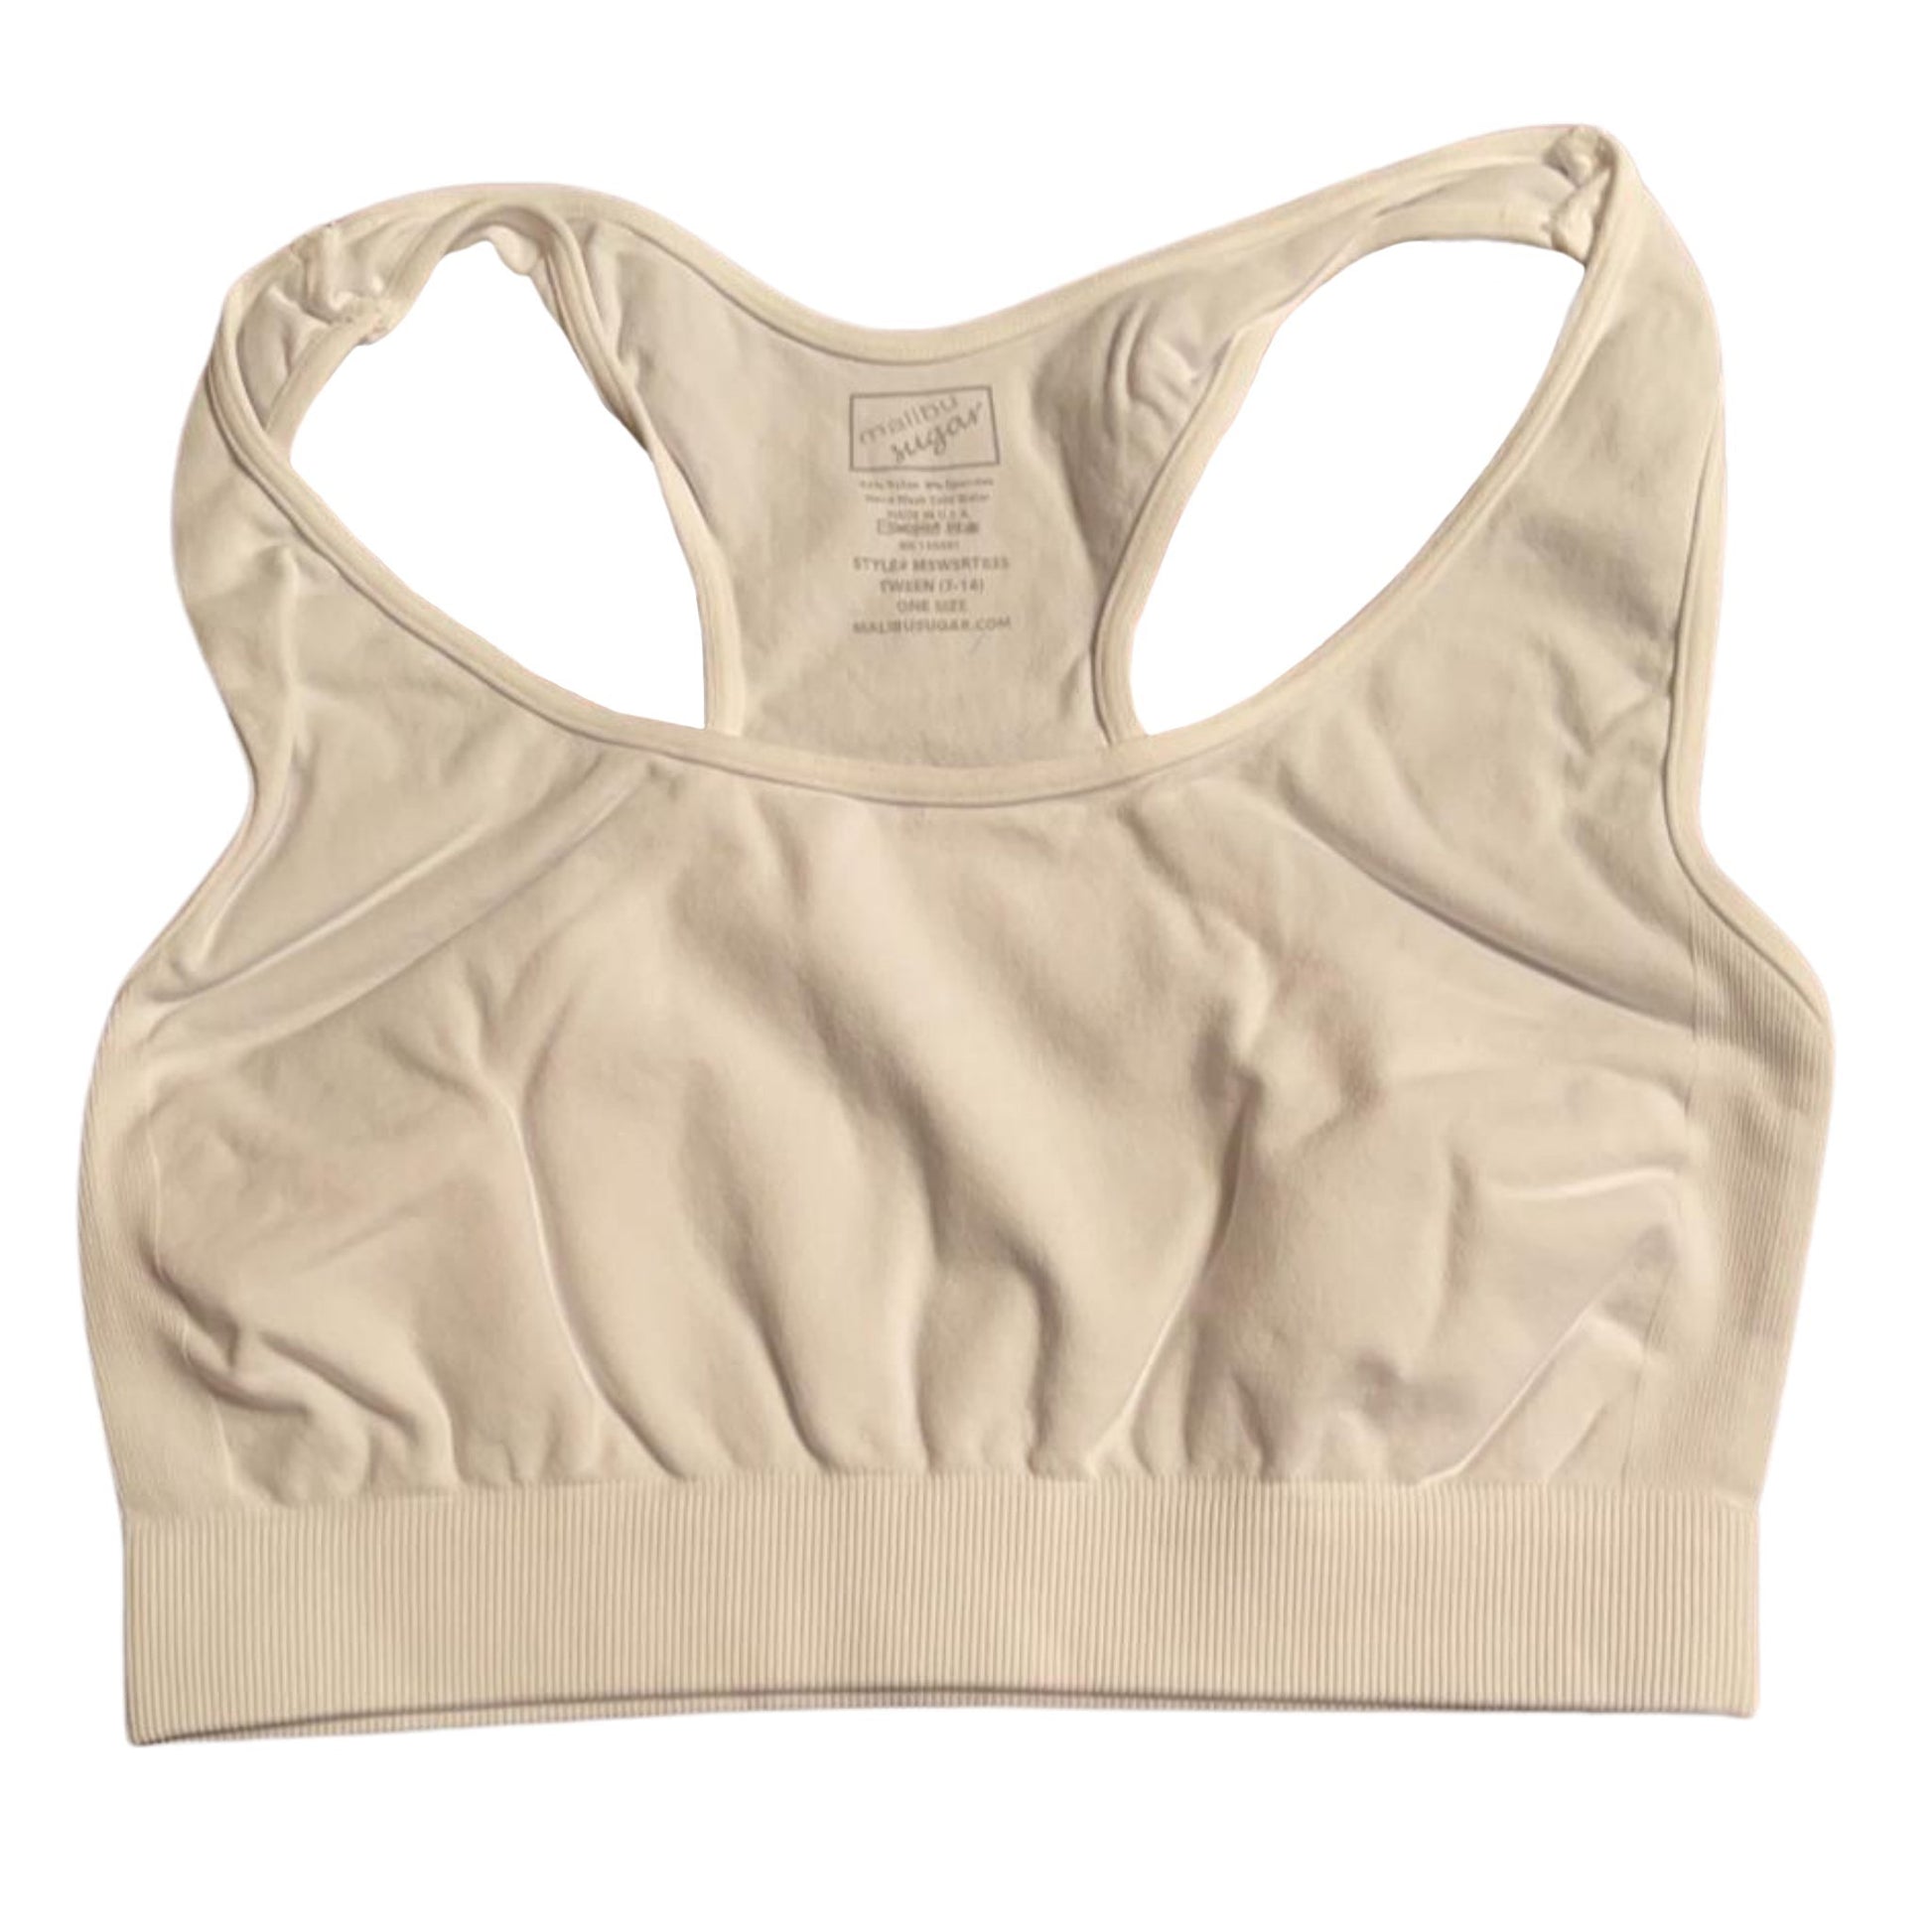 Shop — SugarSports  The Sports Bra That Works.